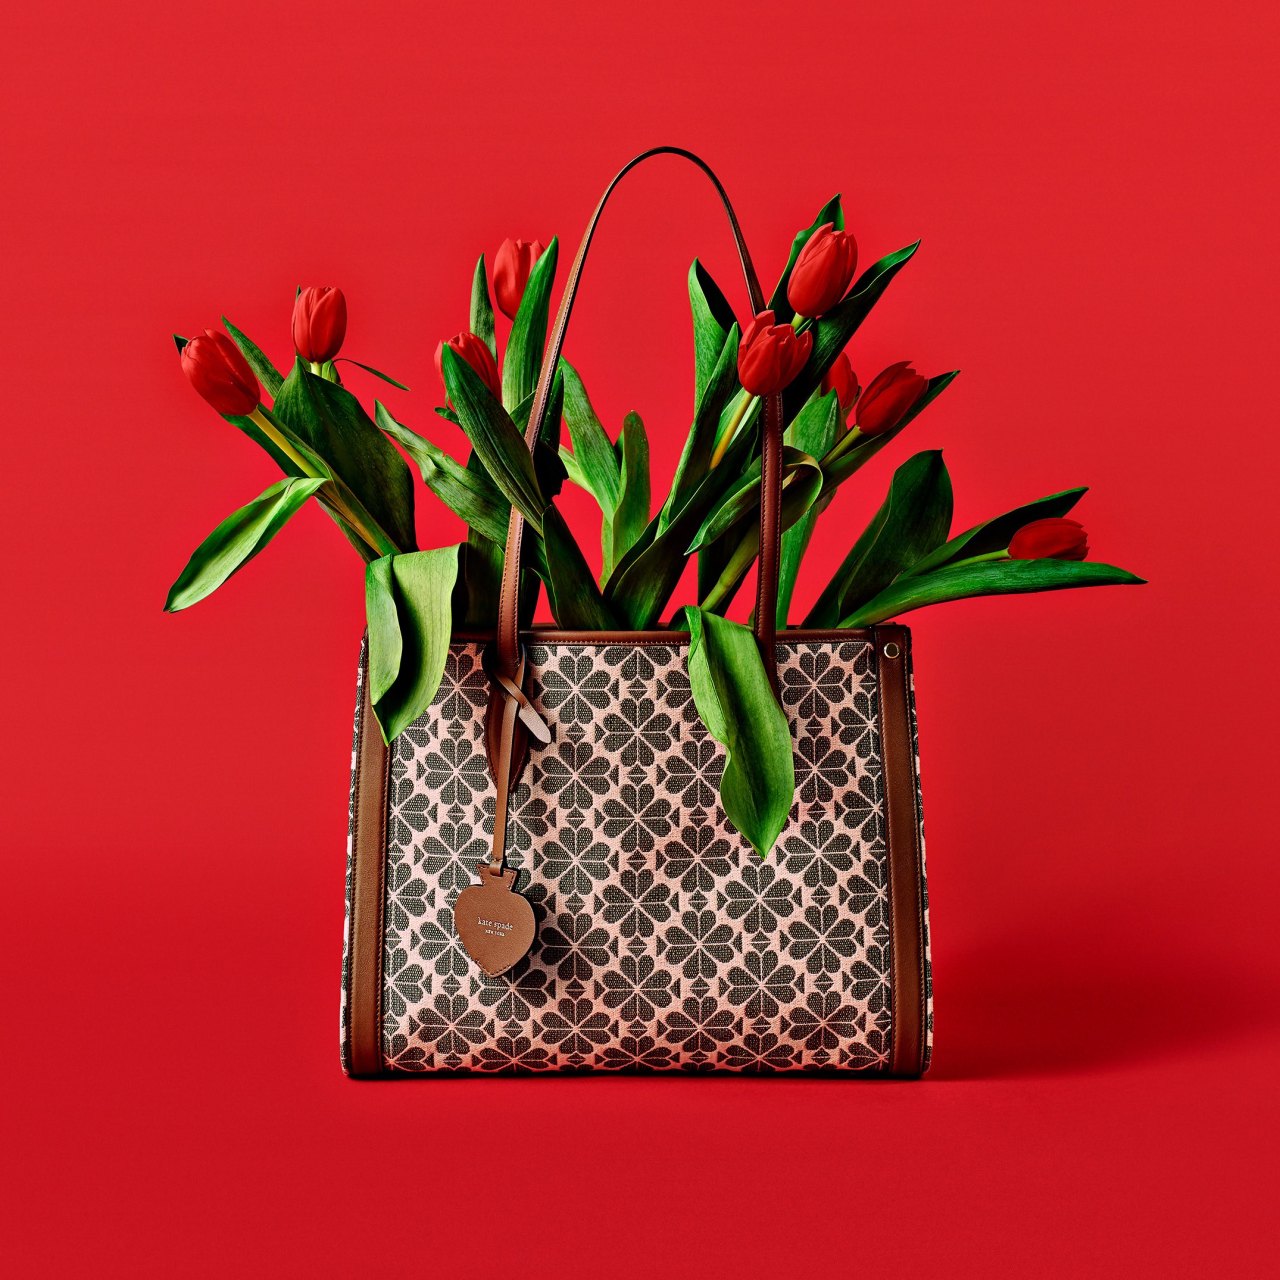 kate spade new york  instant classic. our spade flower jacquard